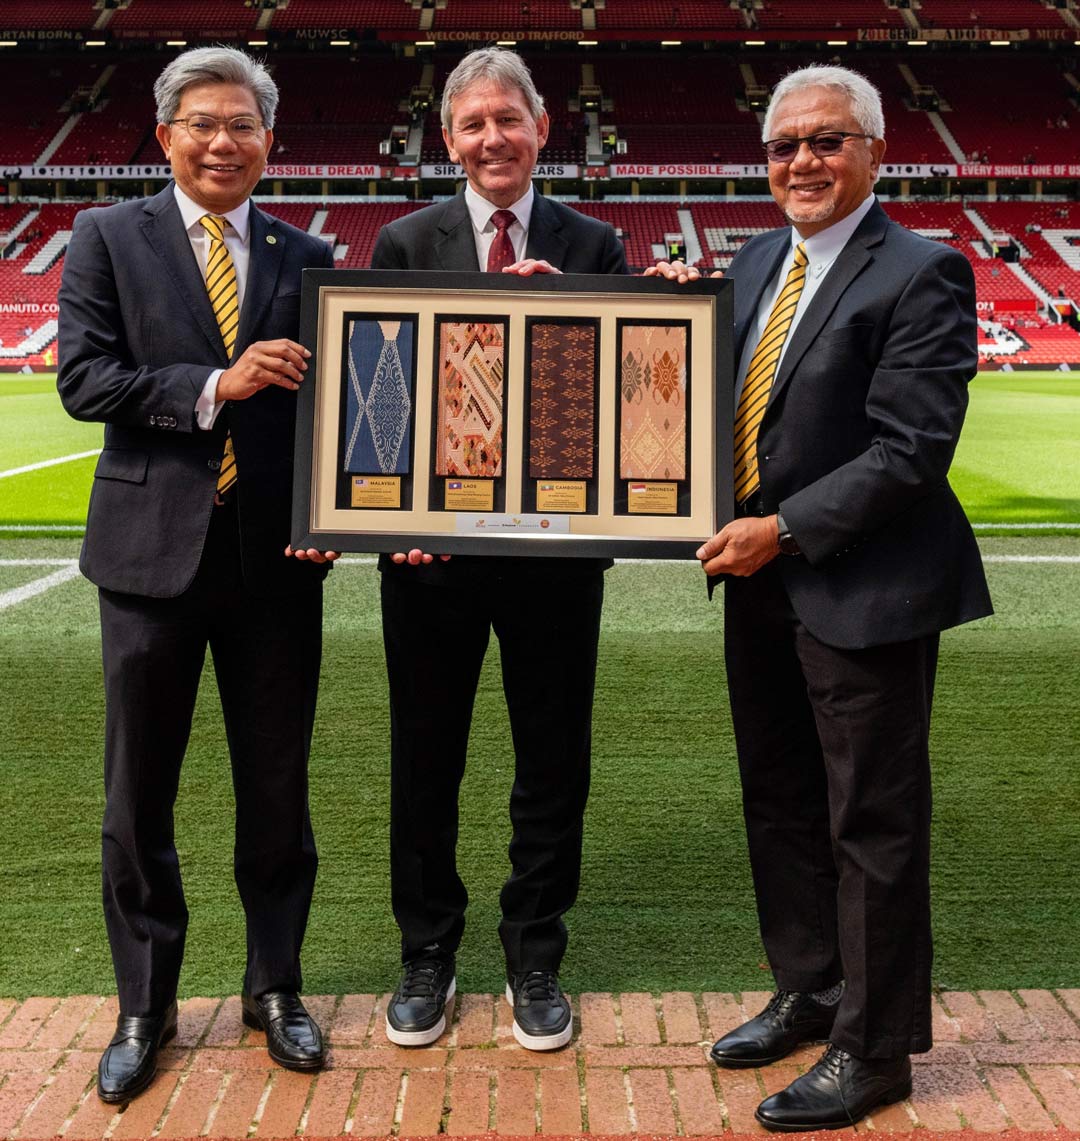 Maybank continues partnership with Manchester United, expanding to Indonesia